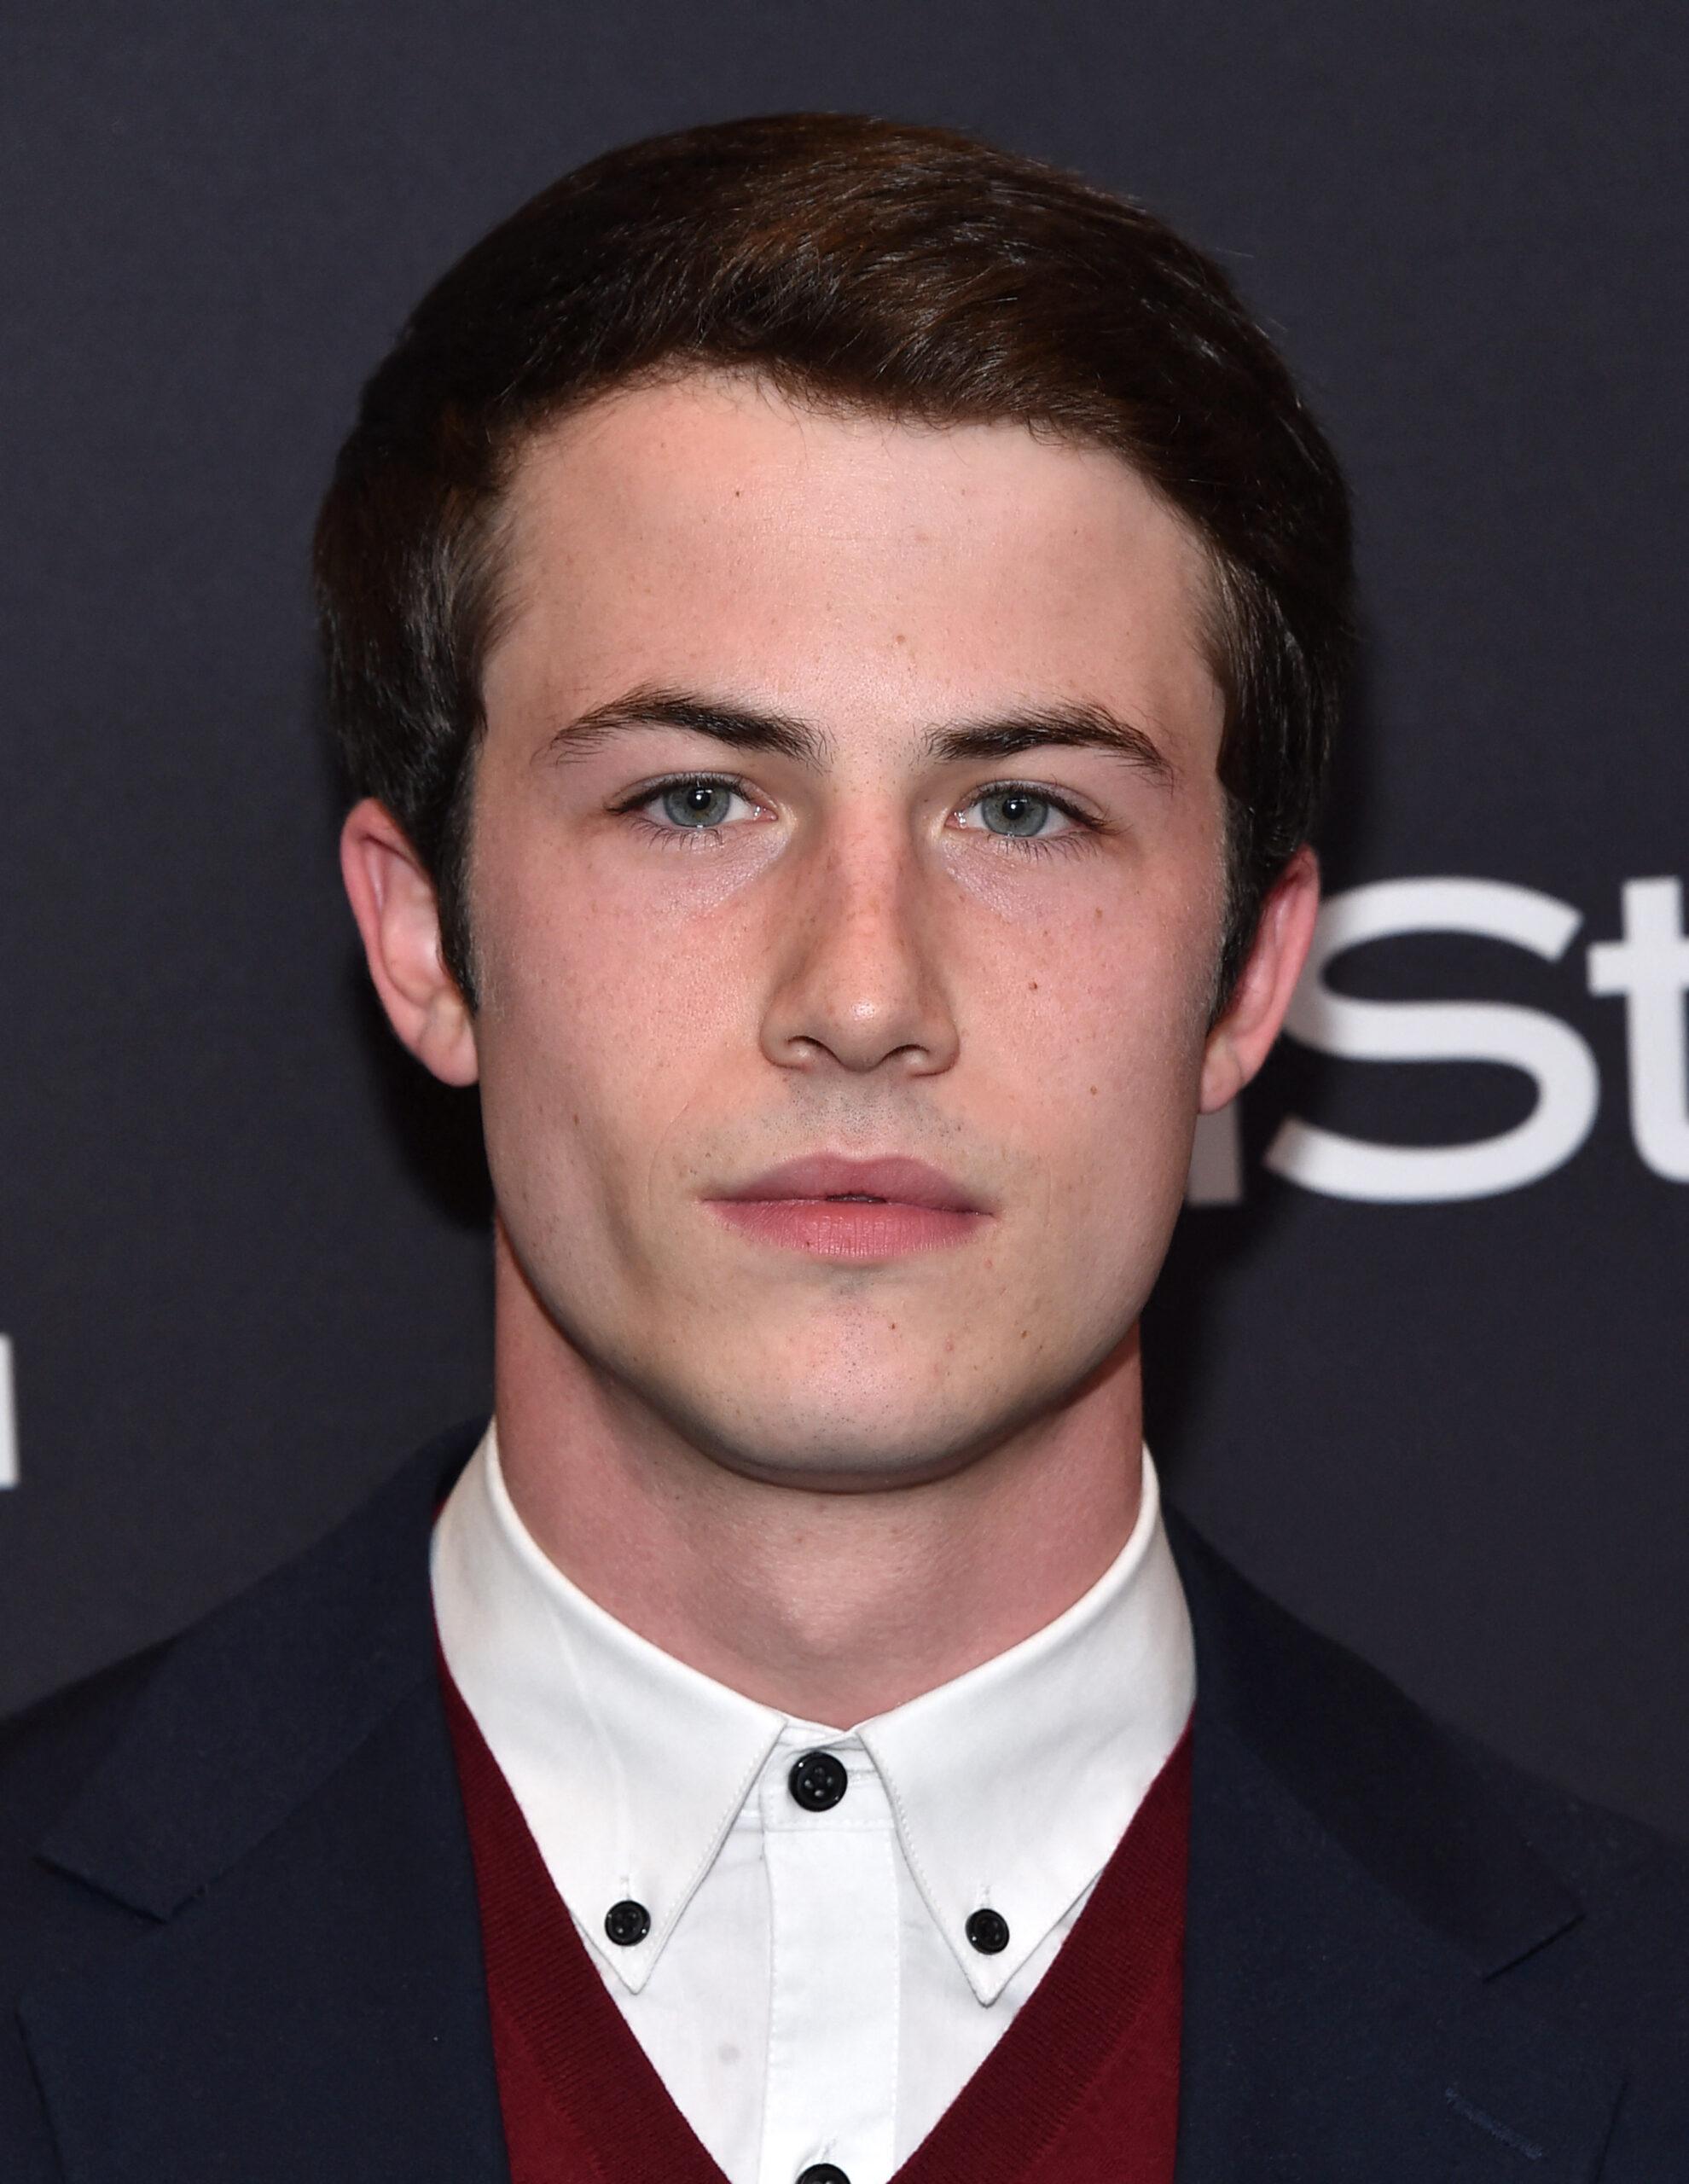 Dylan Minnette at HFPA and InStyle celebrate the 75th Annual Golden Globe Awards